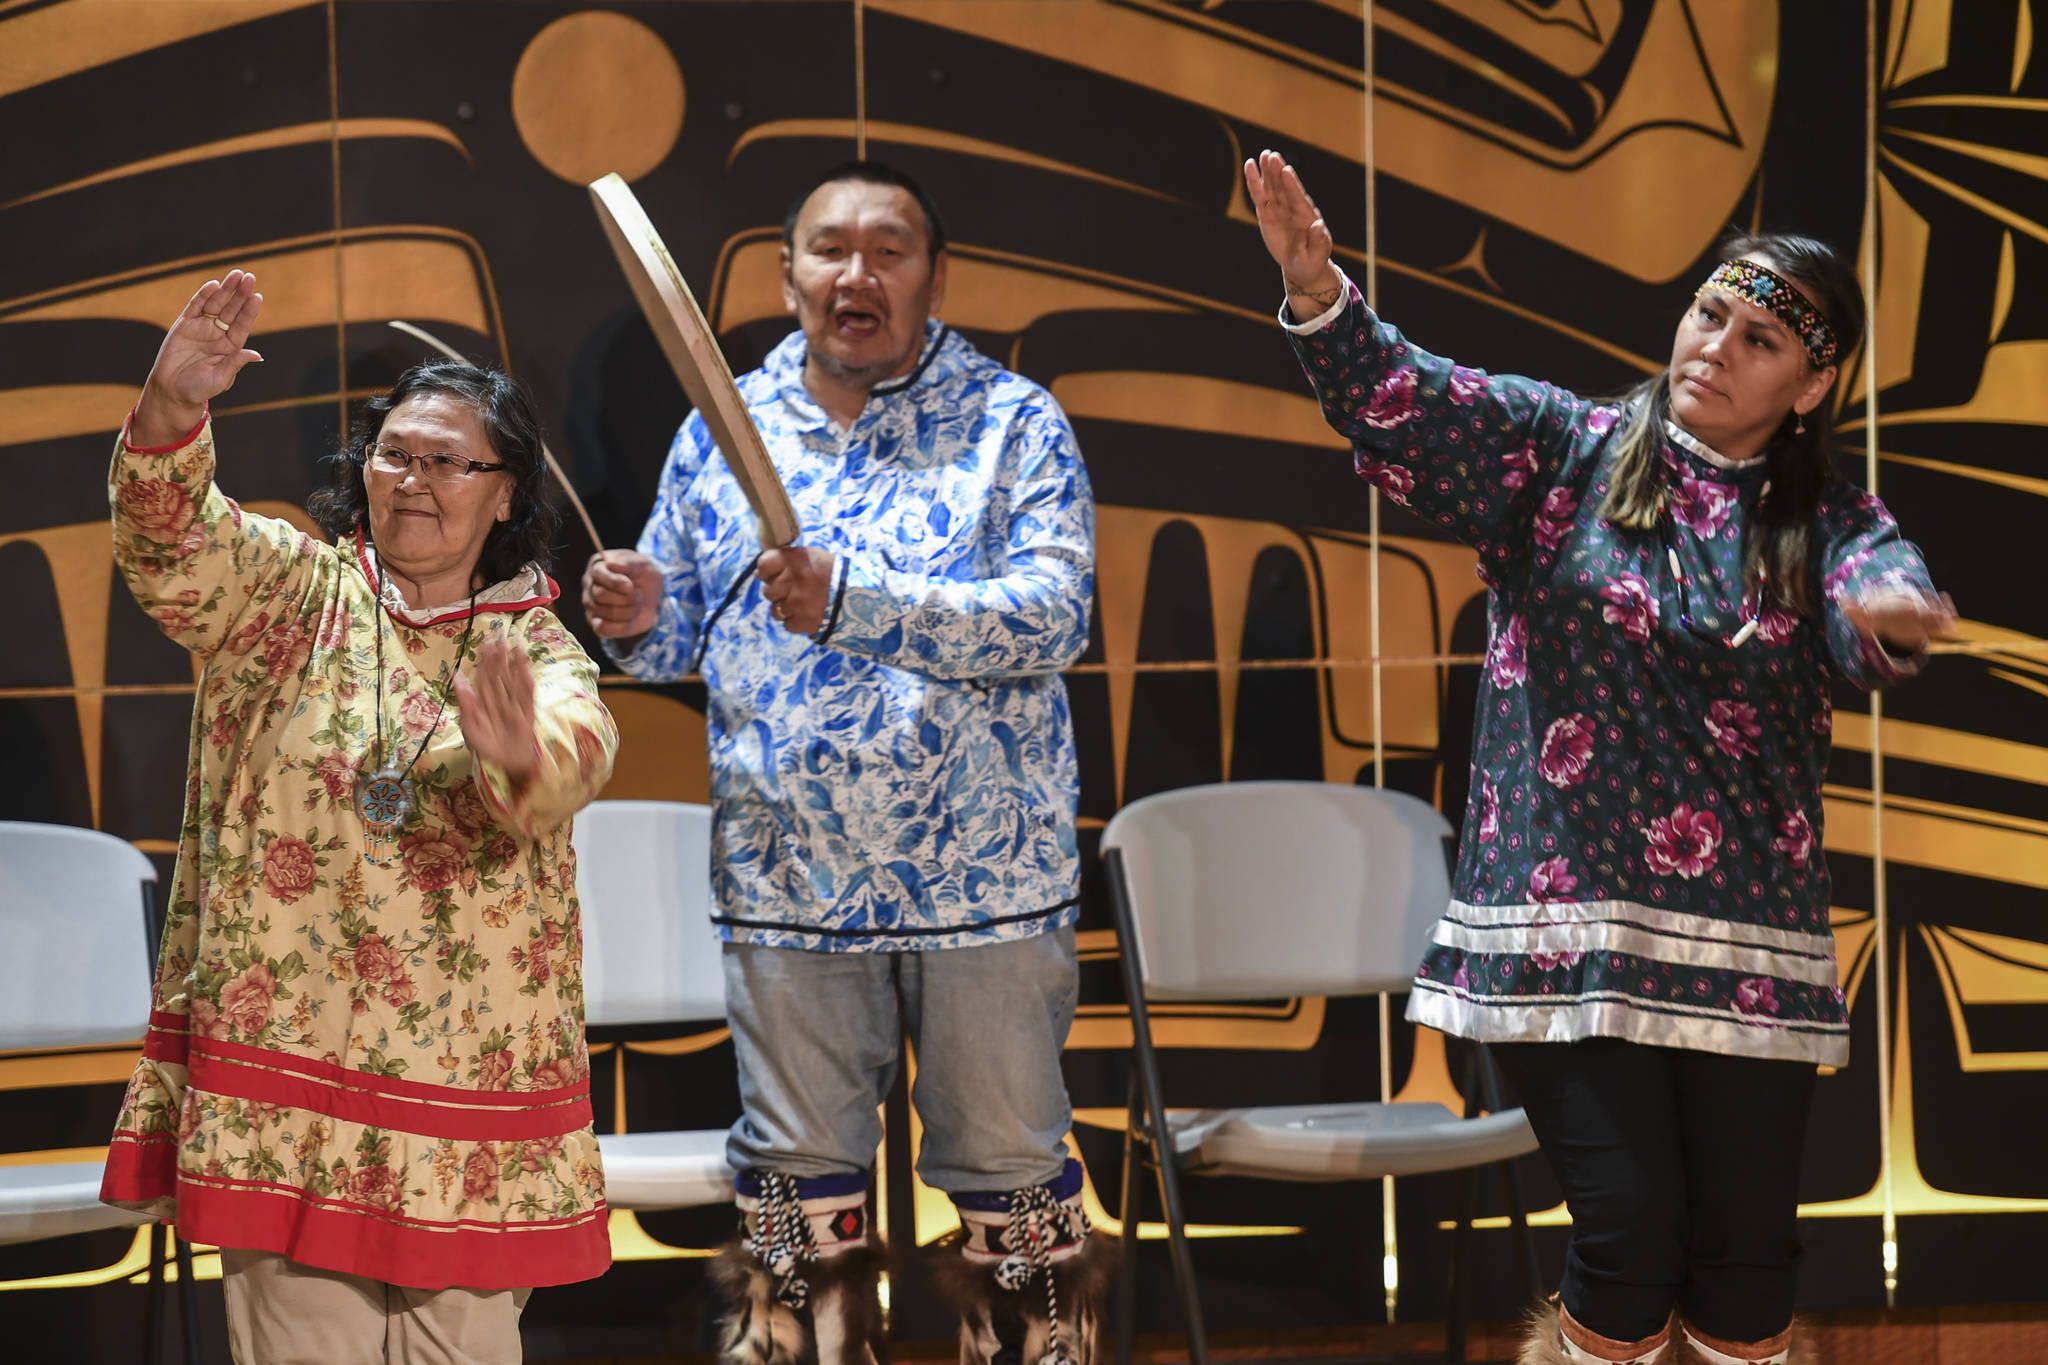 Sealaska Heritage Institute Artists-in-Residence John Waghiyi Jr. and his wife, Arlene Annogiyuk Waghiyi, of Savoonga, perform St. Lawrence Island dancing and song with their niece, Rana Mokiyuk, right, at the Walter Soboleff Center on Wednesday, Aug. 28, 2019. (Michael Penn | Juneau Empire)